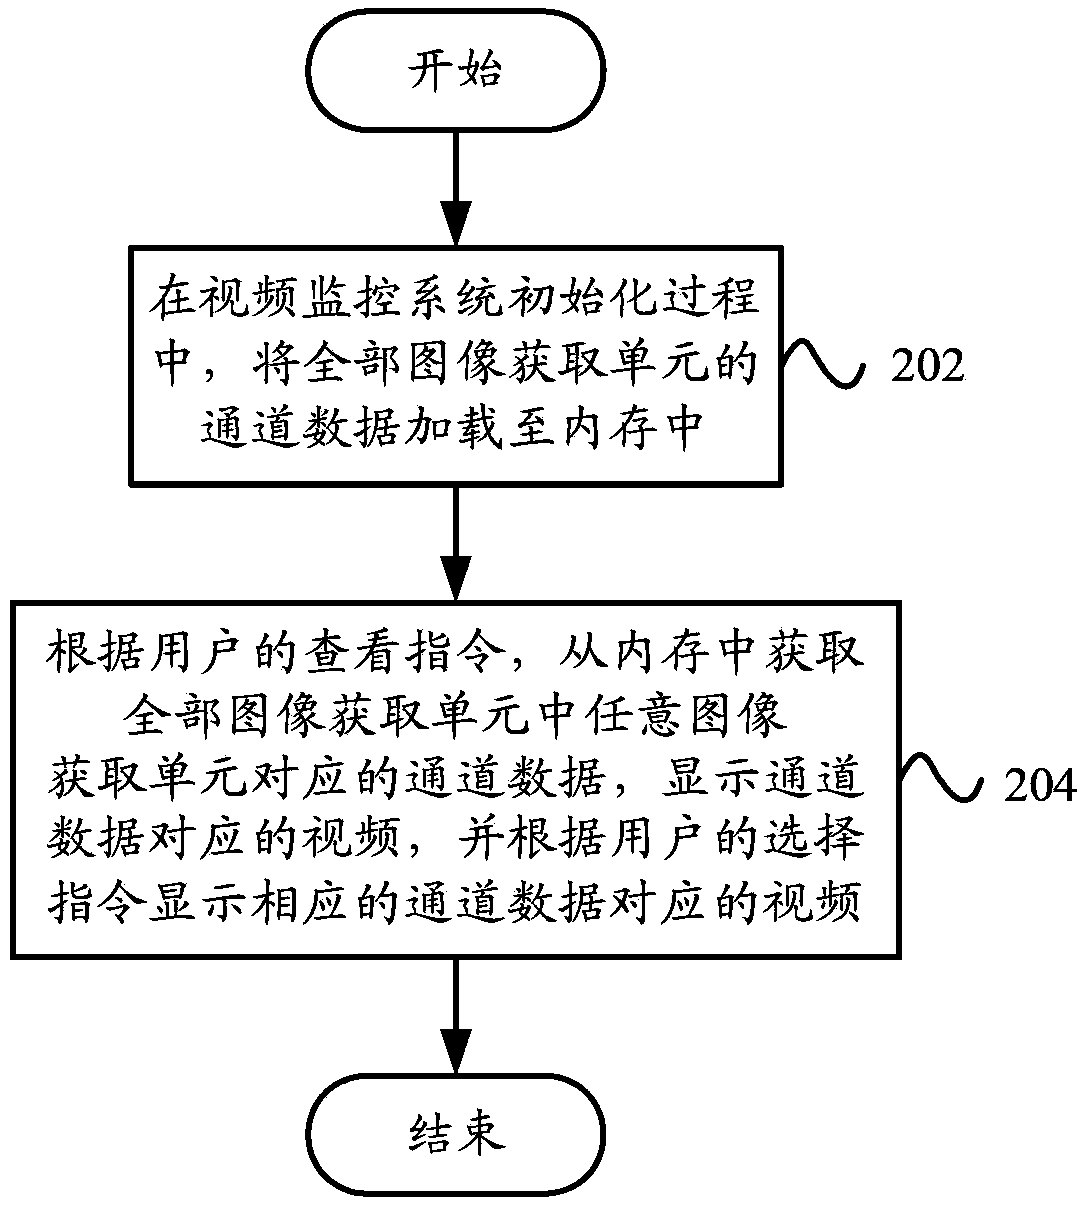 Video monitoring system and video monitoring method